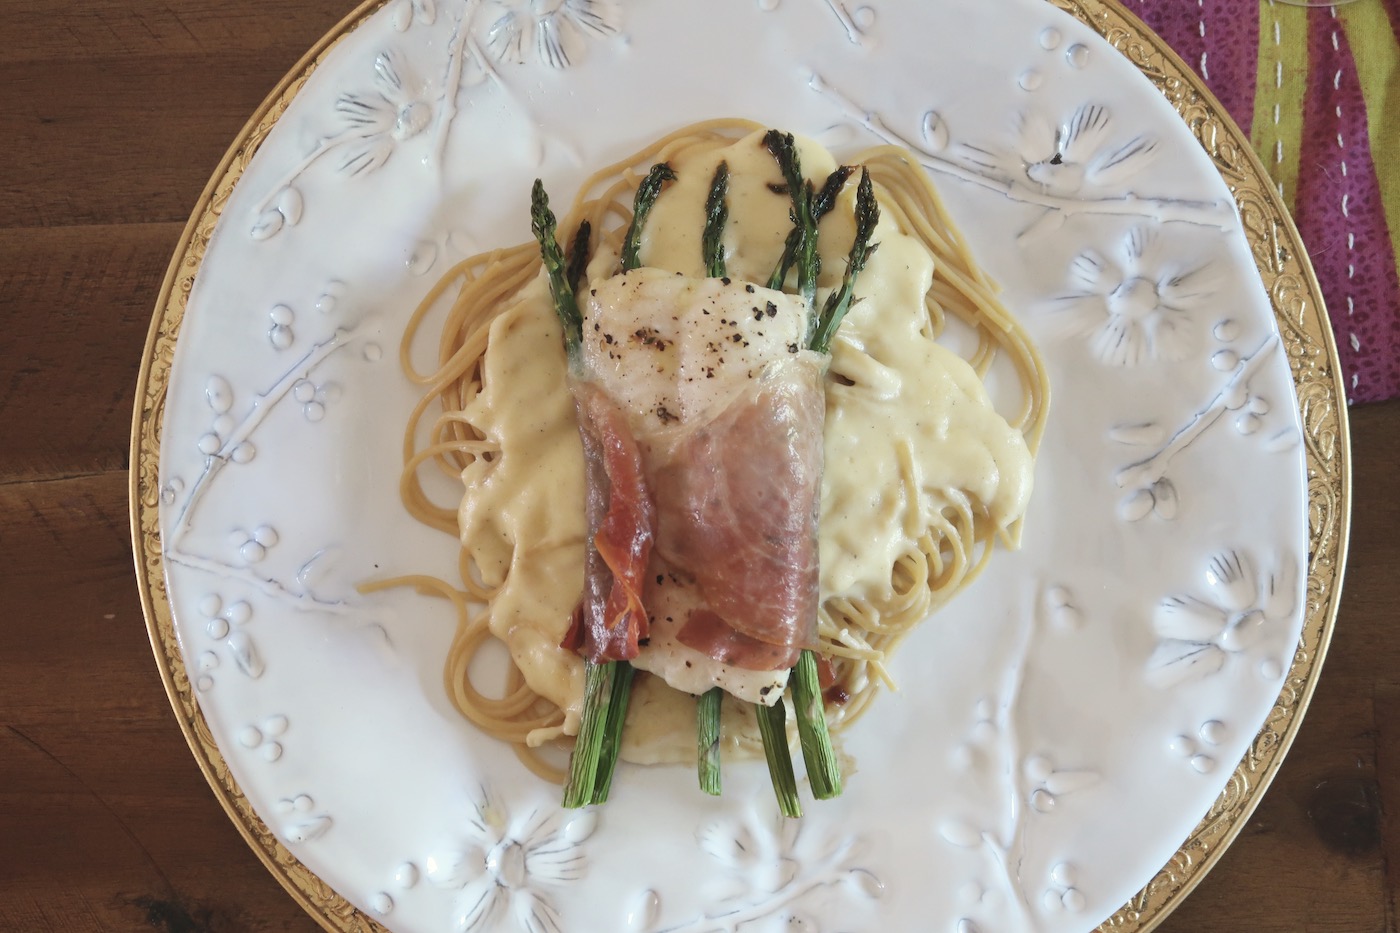 Prosciutto-Wrapped U.S. Catfish with asparagus and Alfredo pasta. So good!